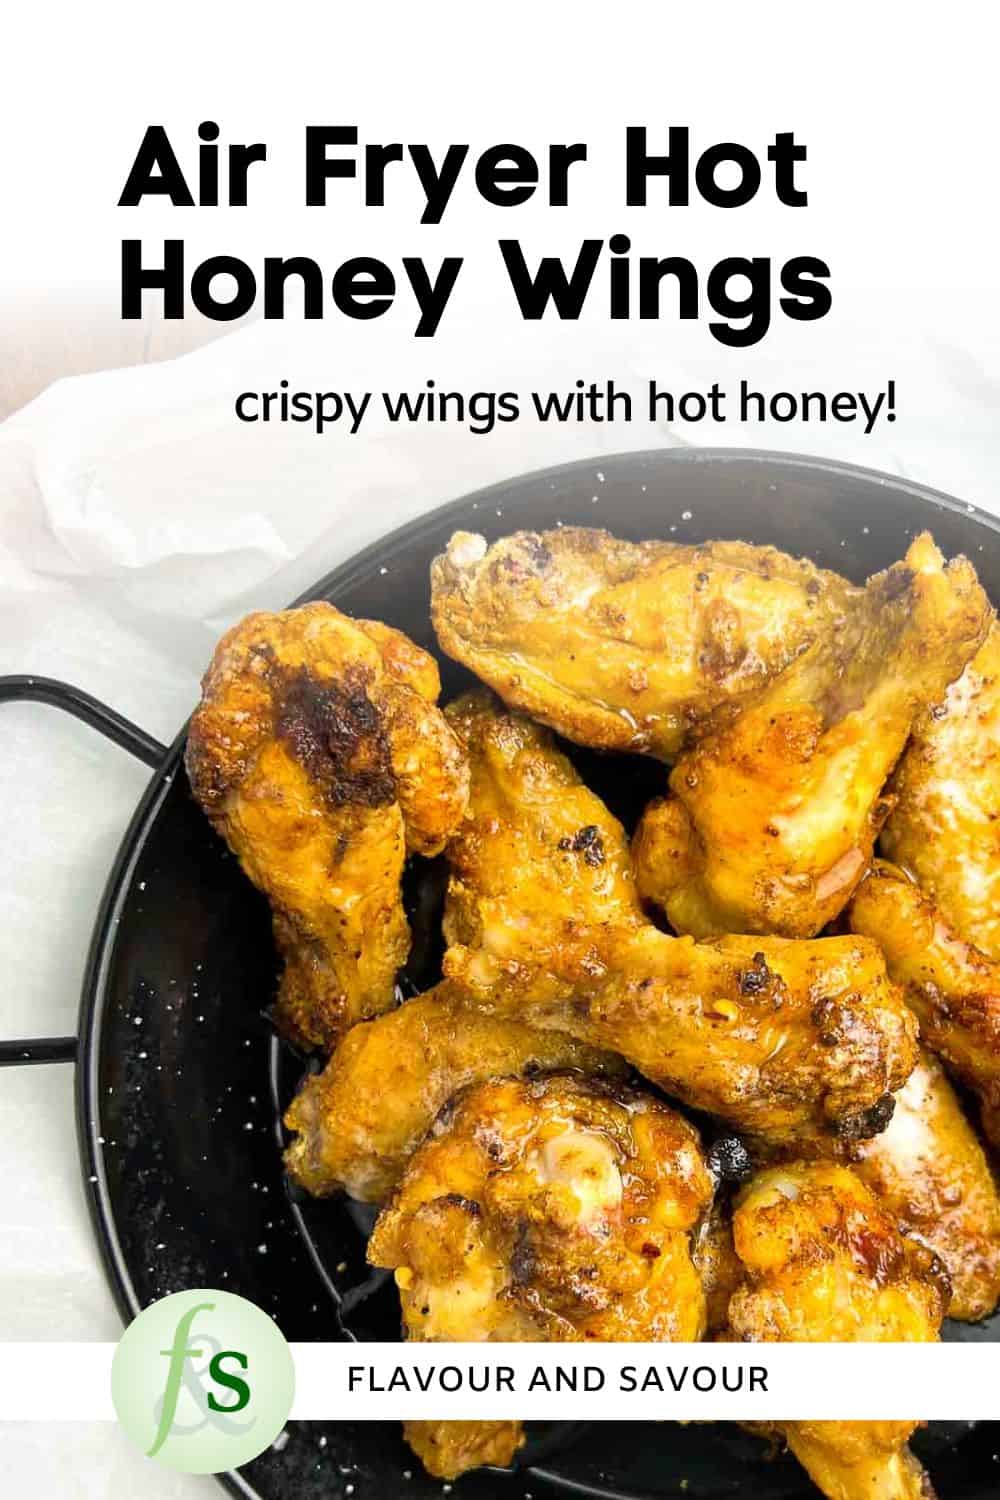 Image with text for air fryer hot honey wings.